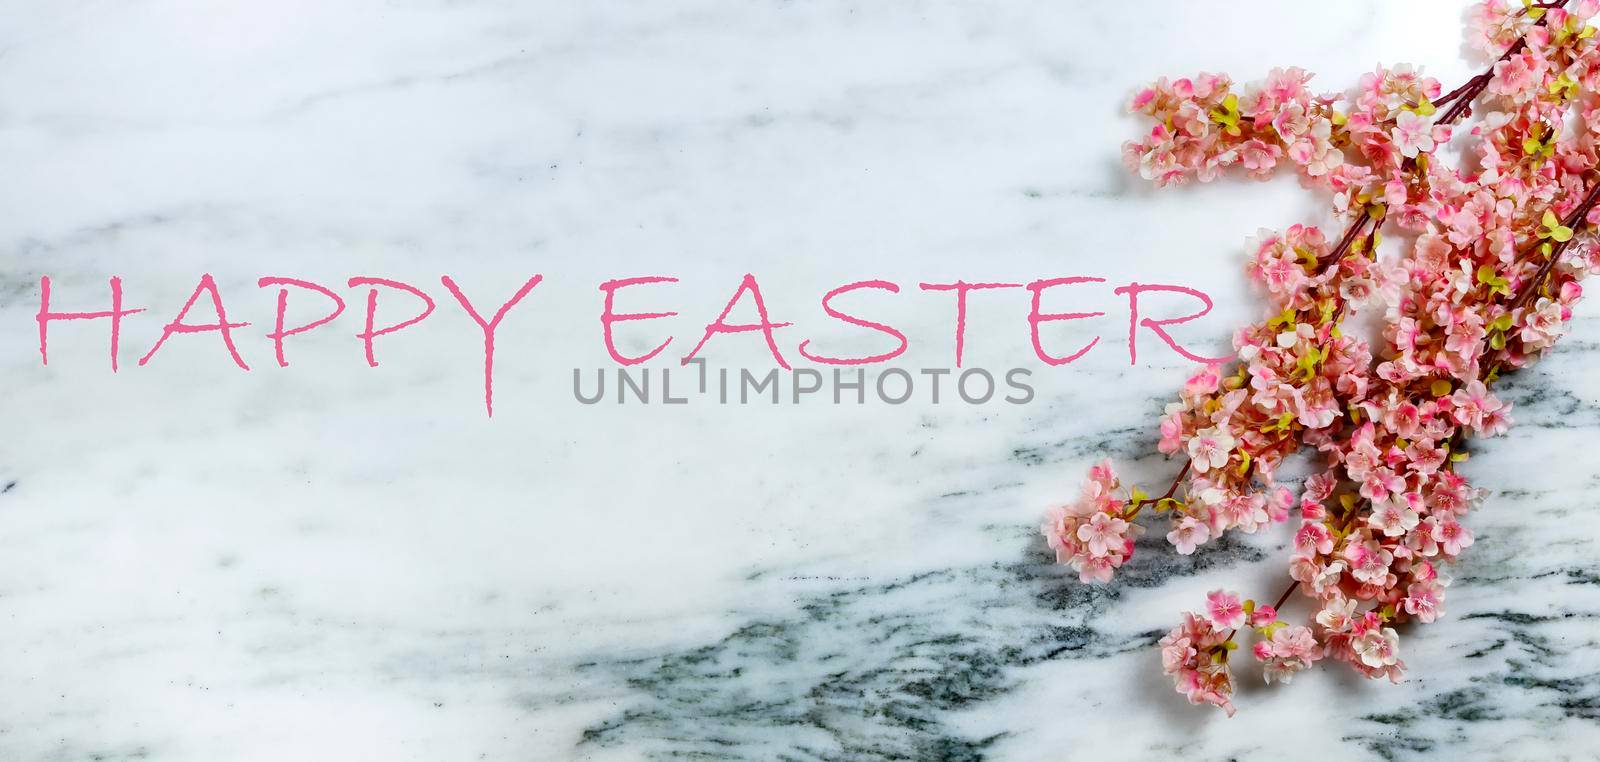 Happy Easter concept with springtime cherry blossoms on stone background plus added texted message